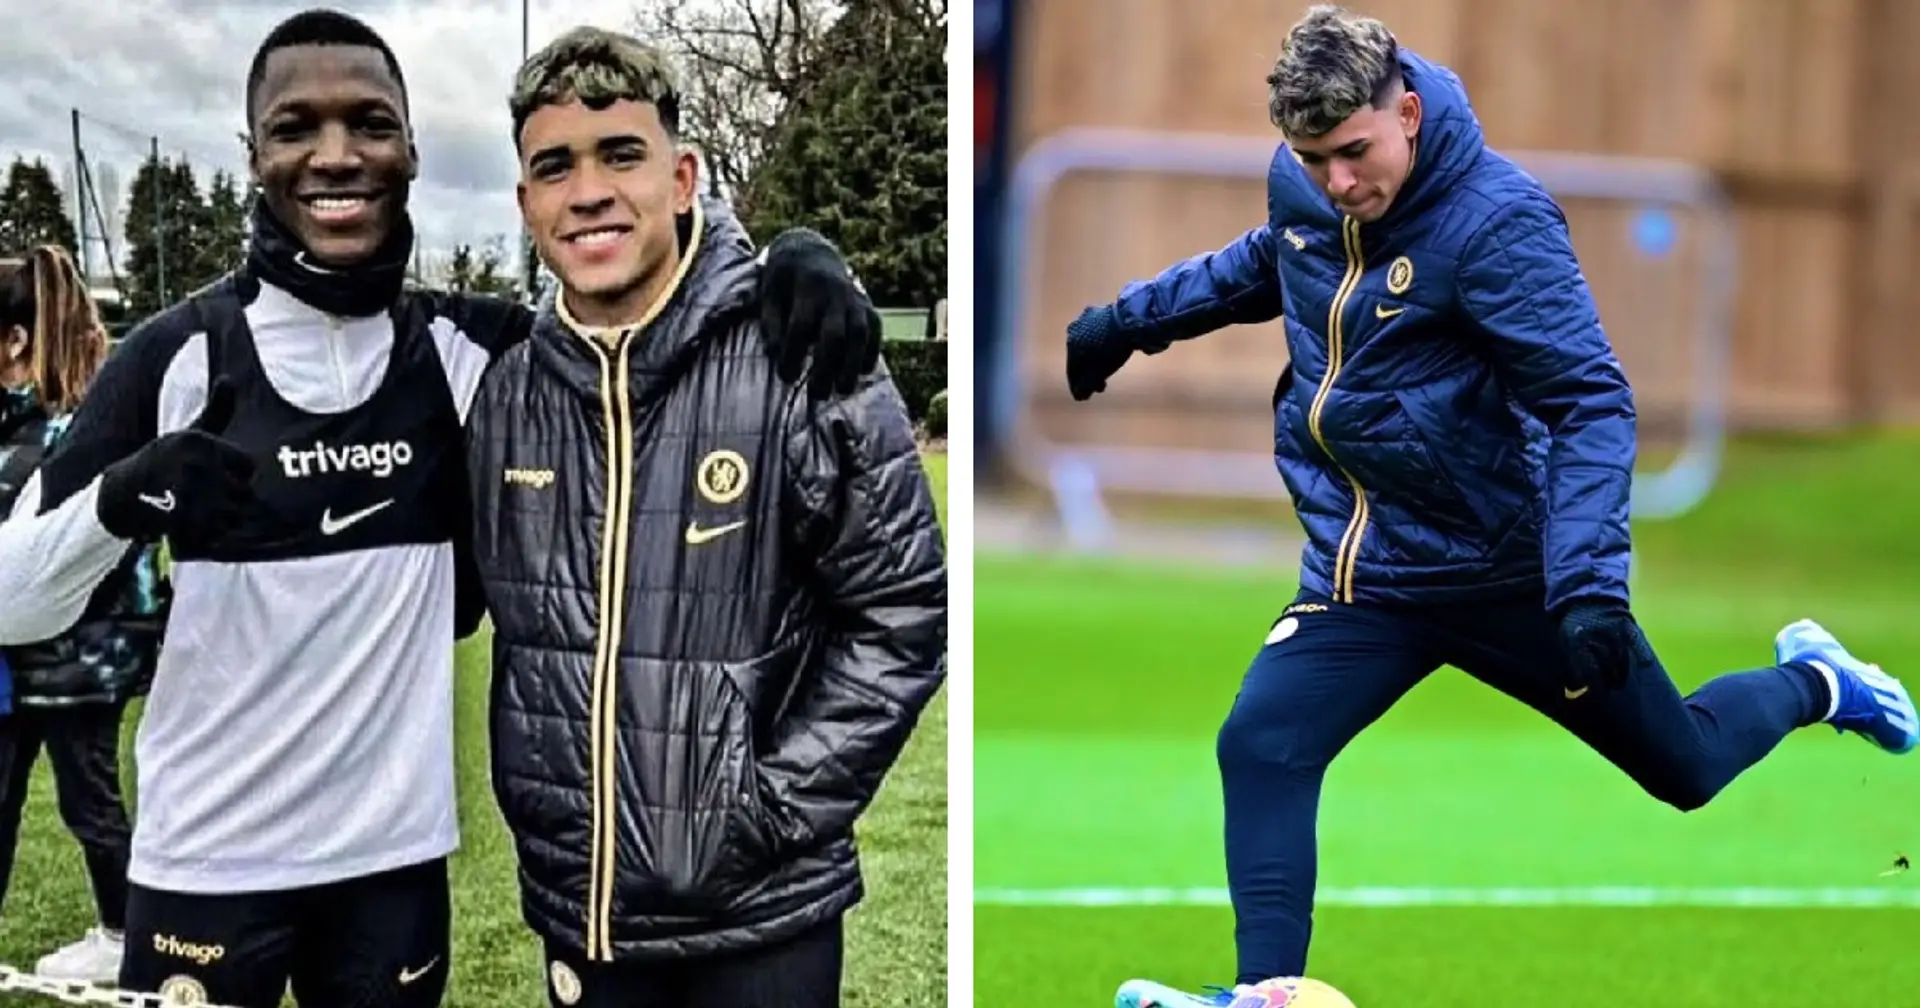 Spotted: Kendry Paez trains with Chelsea at Cobham